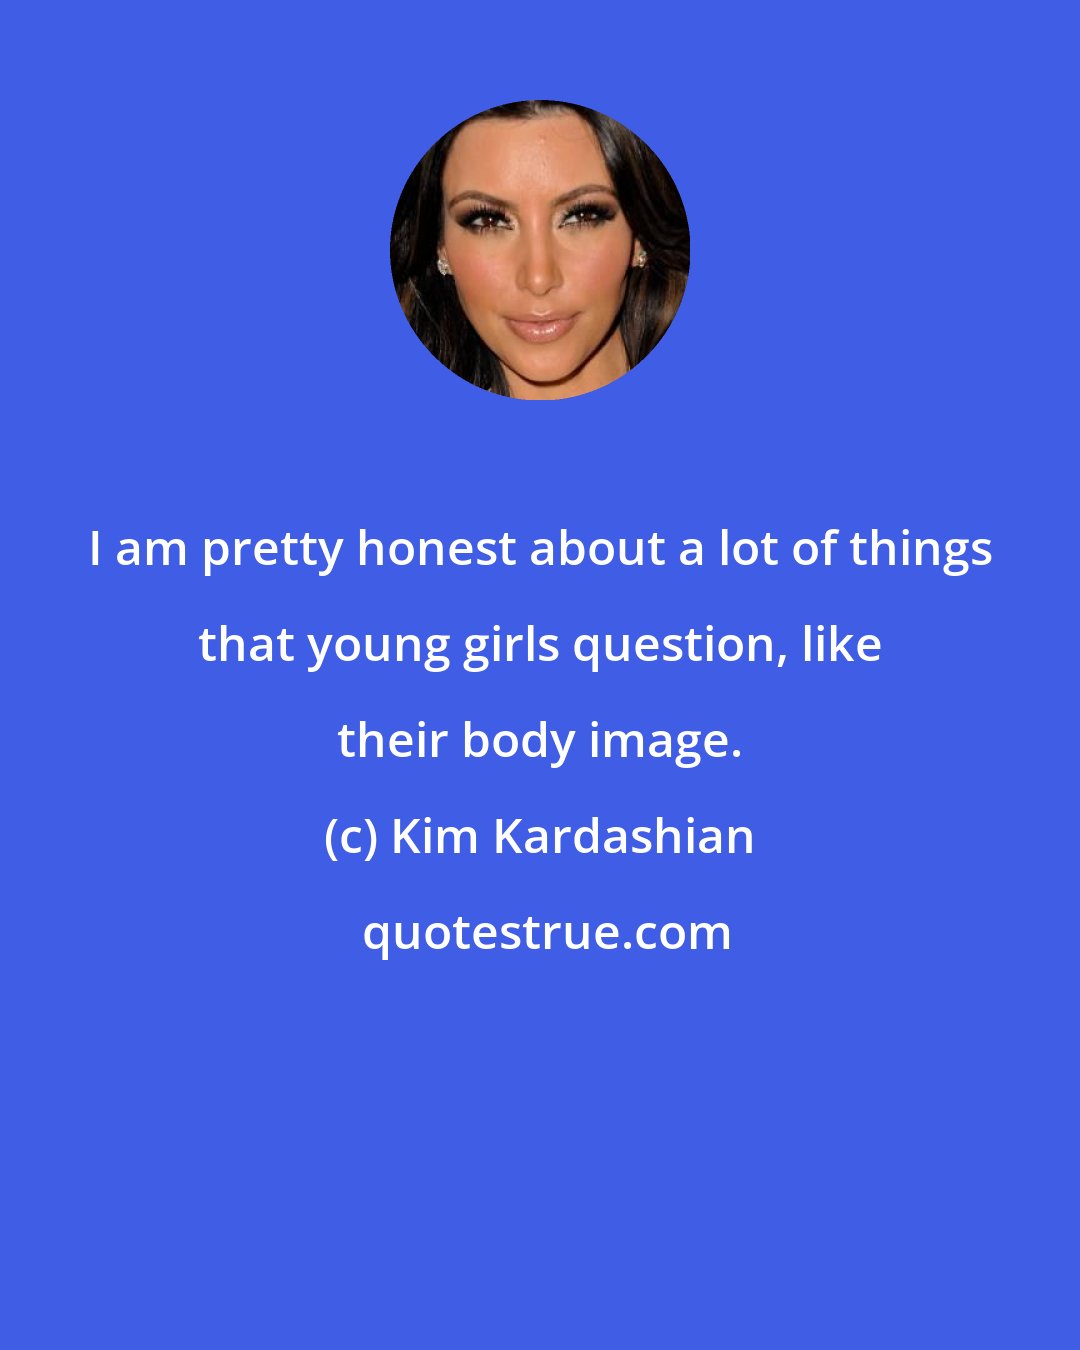 Kim Kardashian: I am pretty honest about a lot of things that young girls question, like their body image.